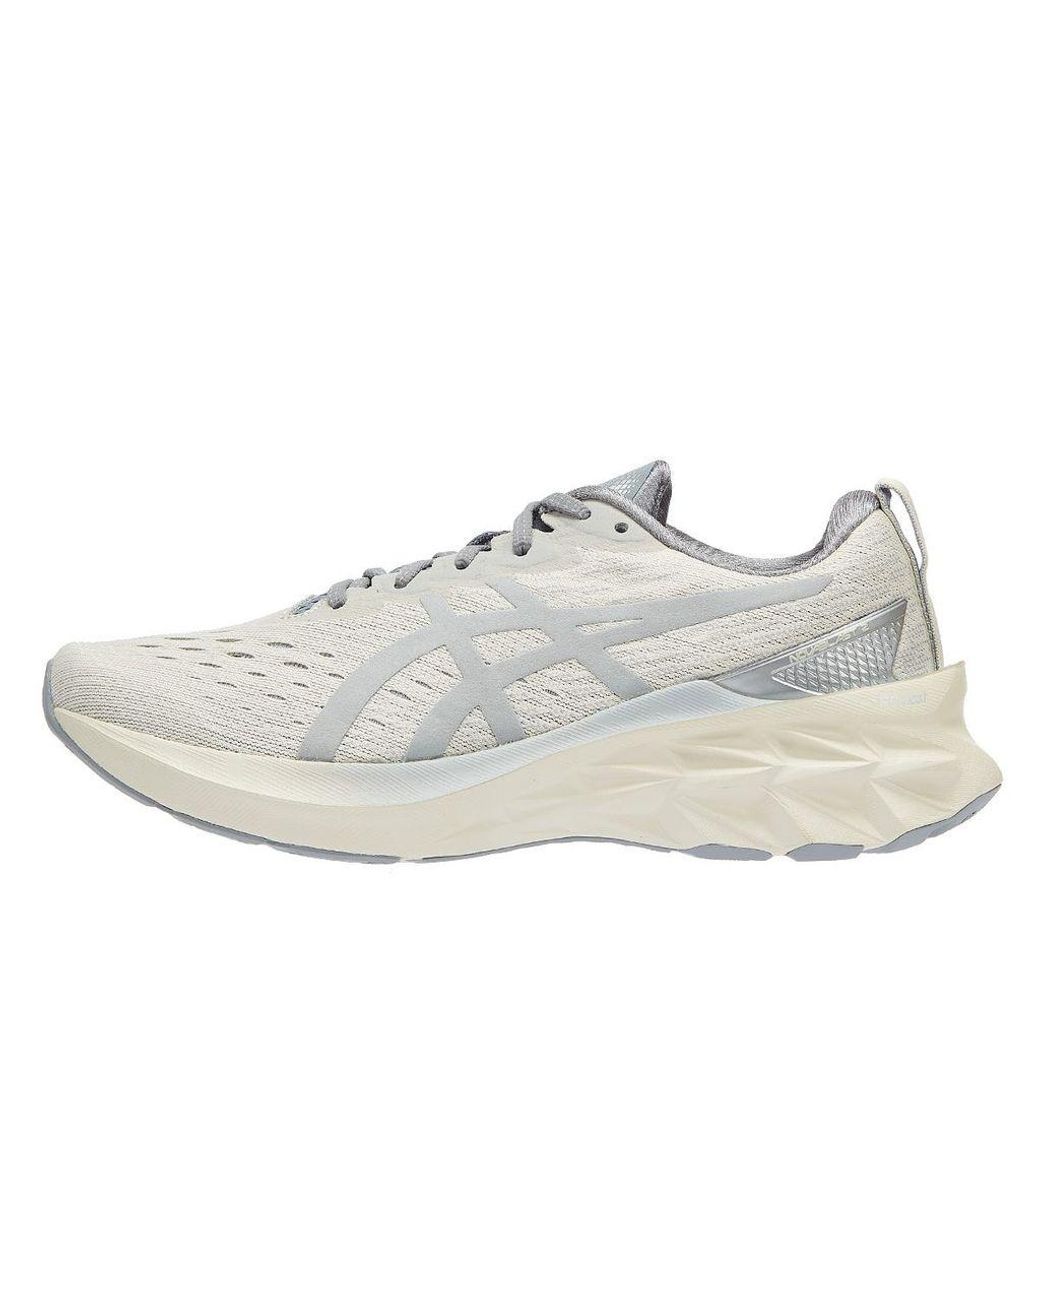 Eu 42.5 in Grey for Men Mens Shoes Trainers Low-top trainers Asics Novablast 2 S Smoke Grey/piedmont Grey Trainers-uk 8 